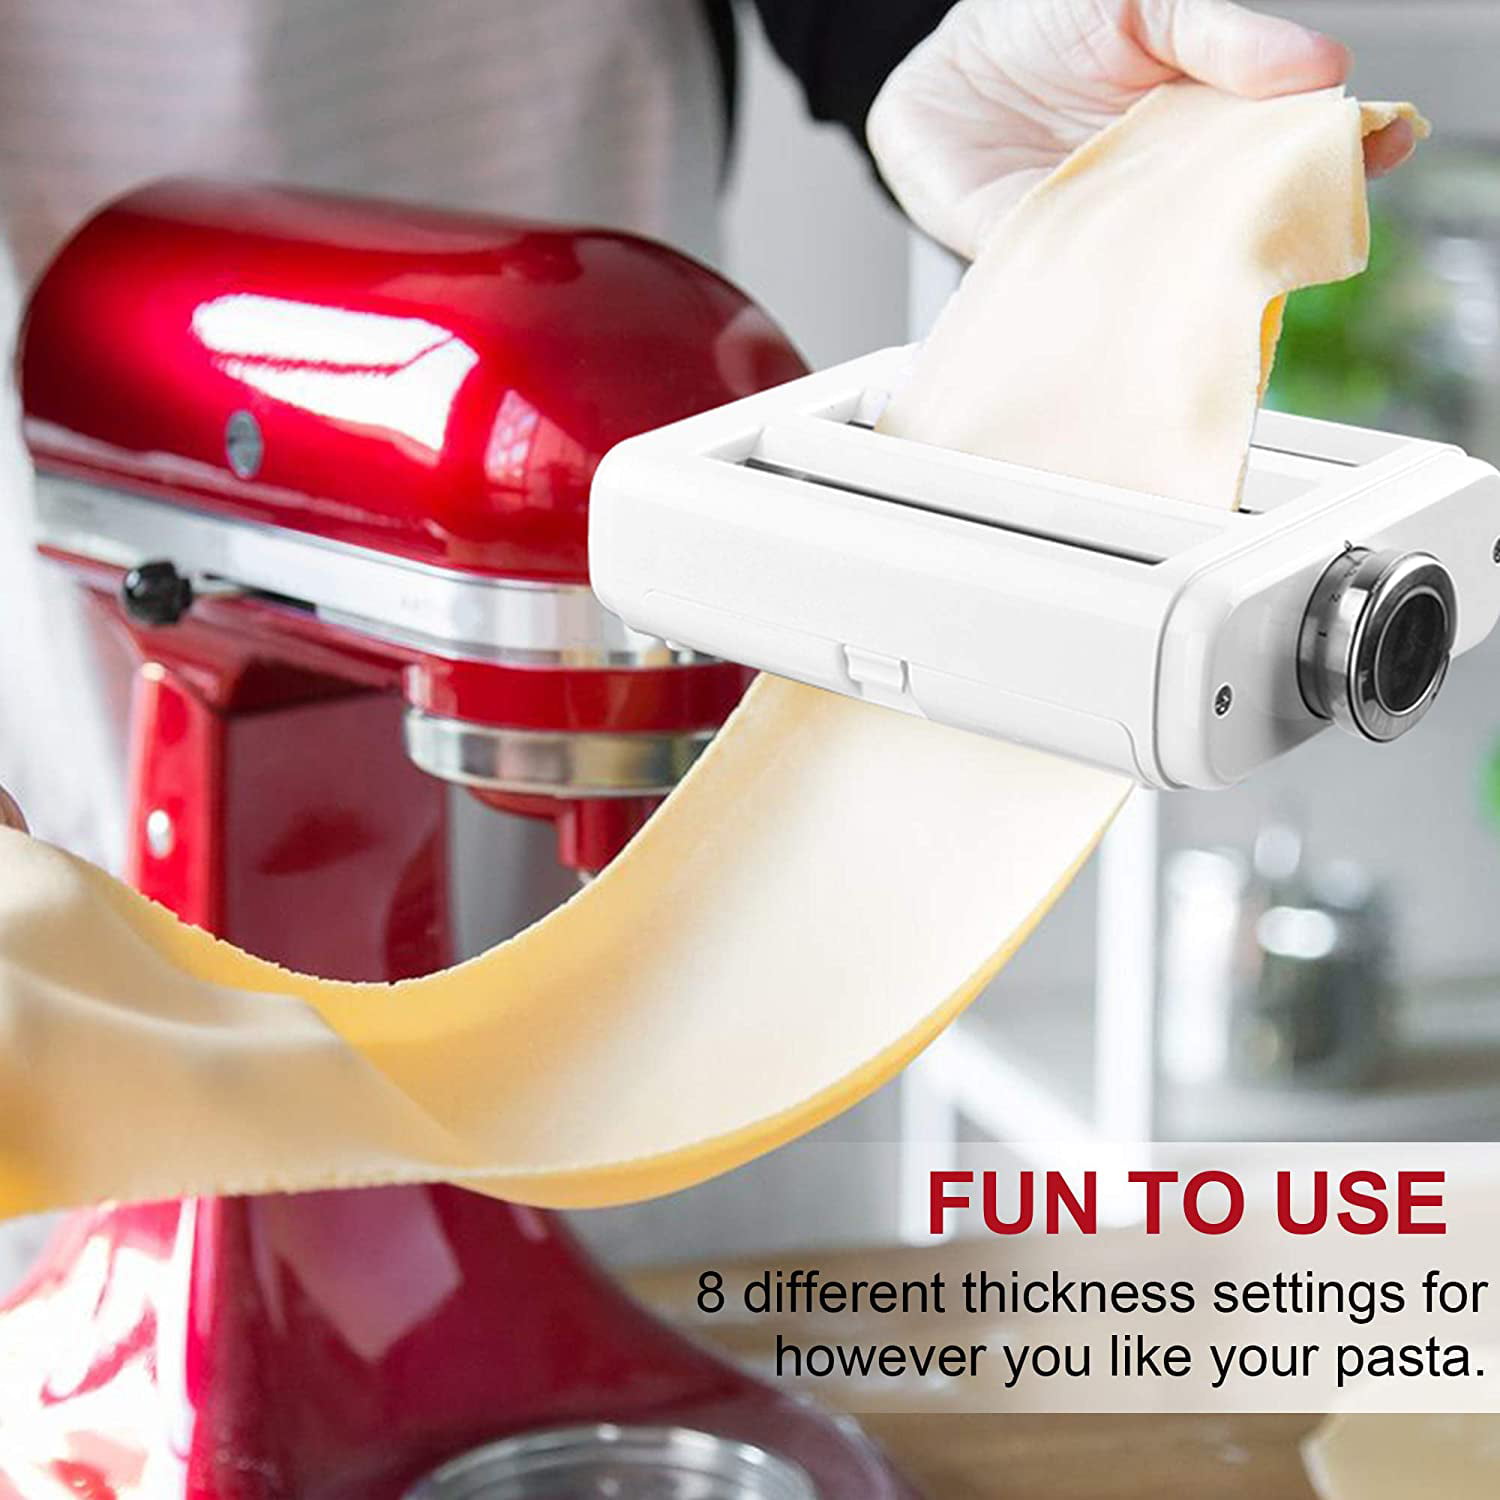 Kenome Pasta Maker 3 in 1 Set for KitchenAid Stand Mixers, with Pasta Sheet Roller, Spaghetti Cutter, Fettuccine Maker Accessories and Cleaning Brush - Walmart.com